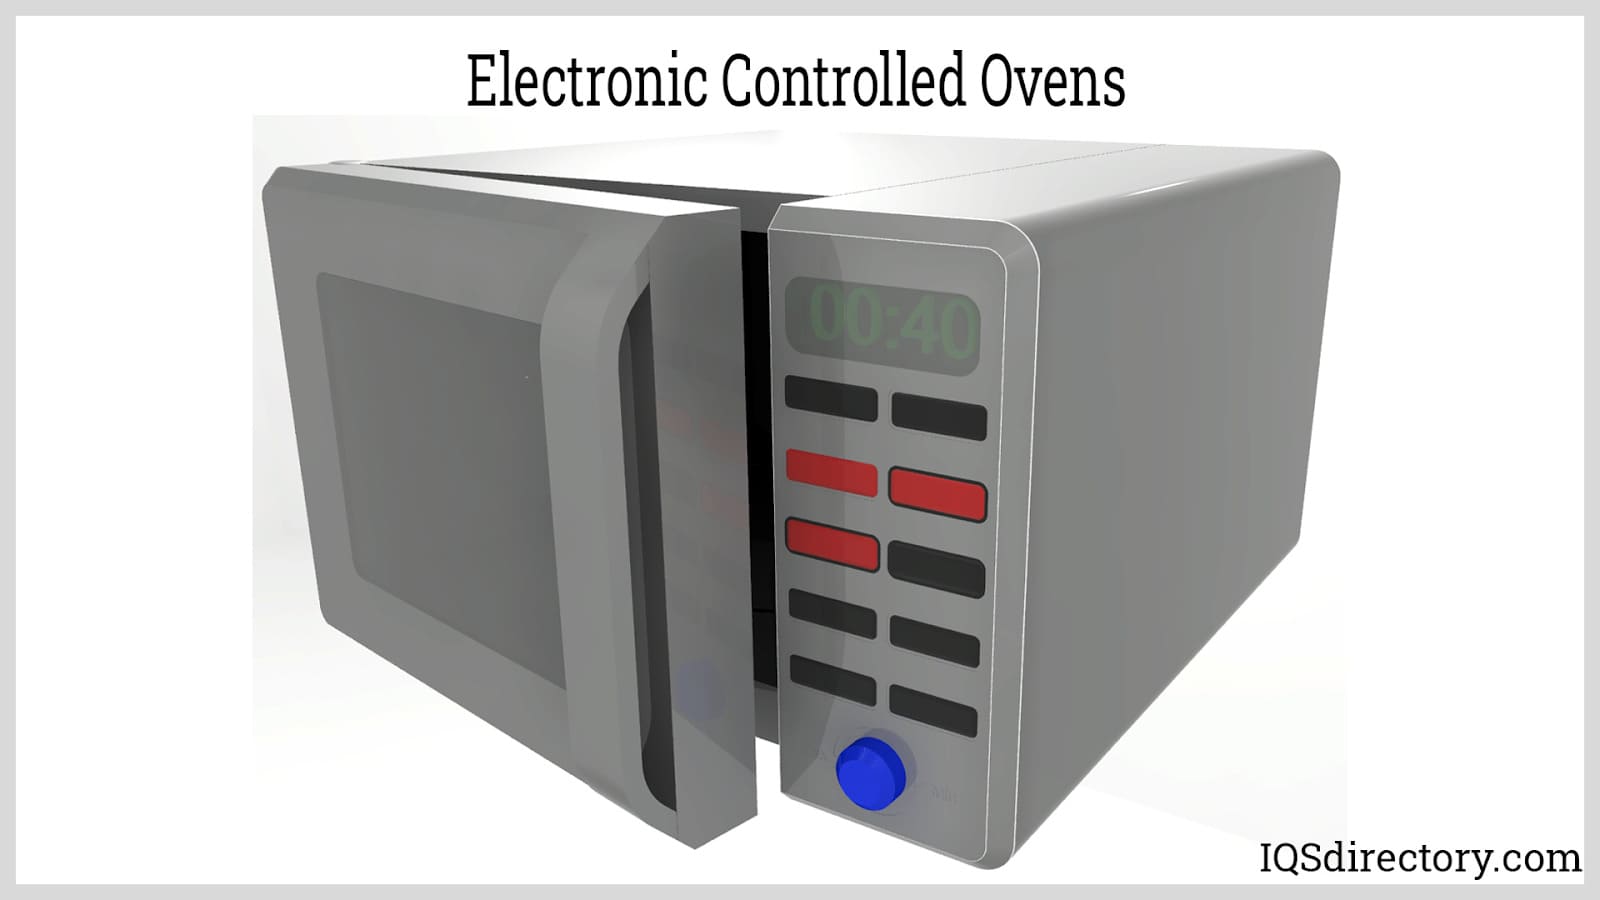 Electronic Controlled Ovens